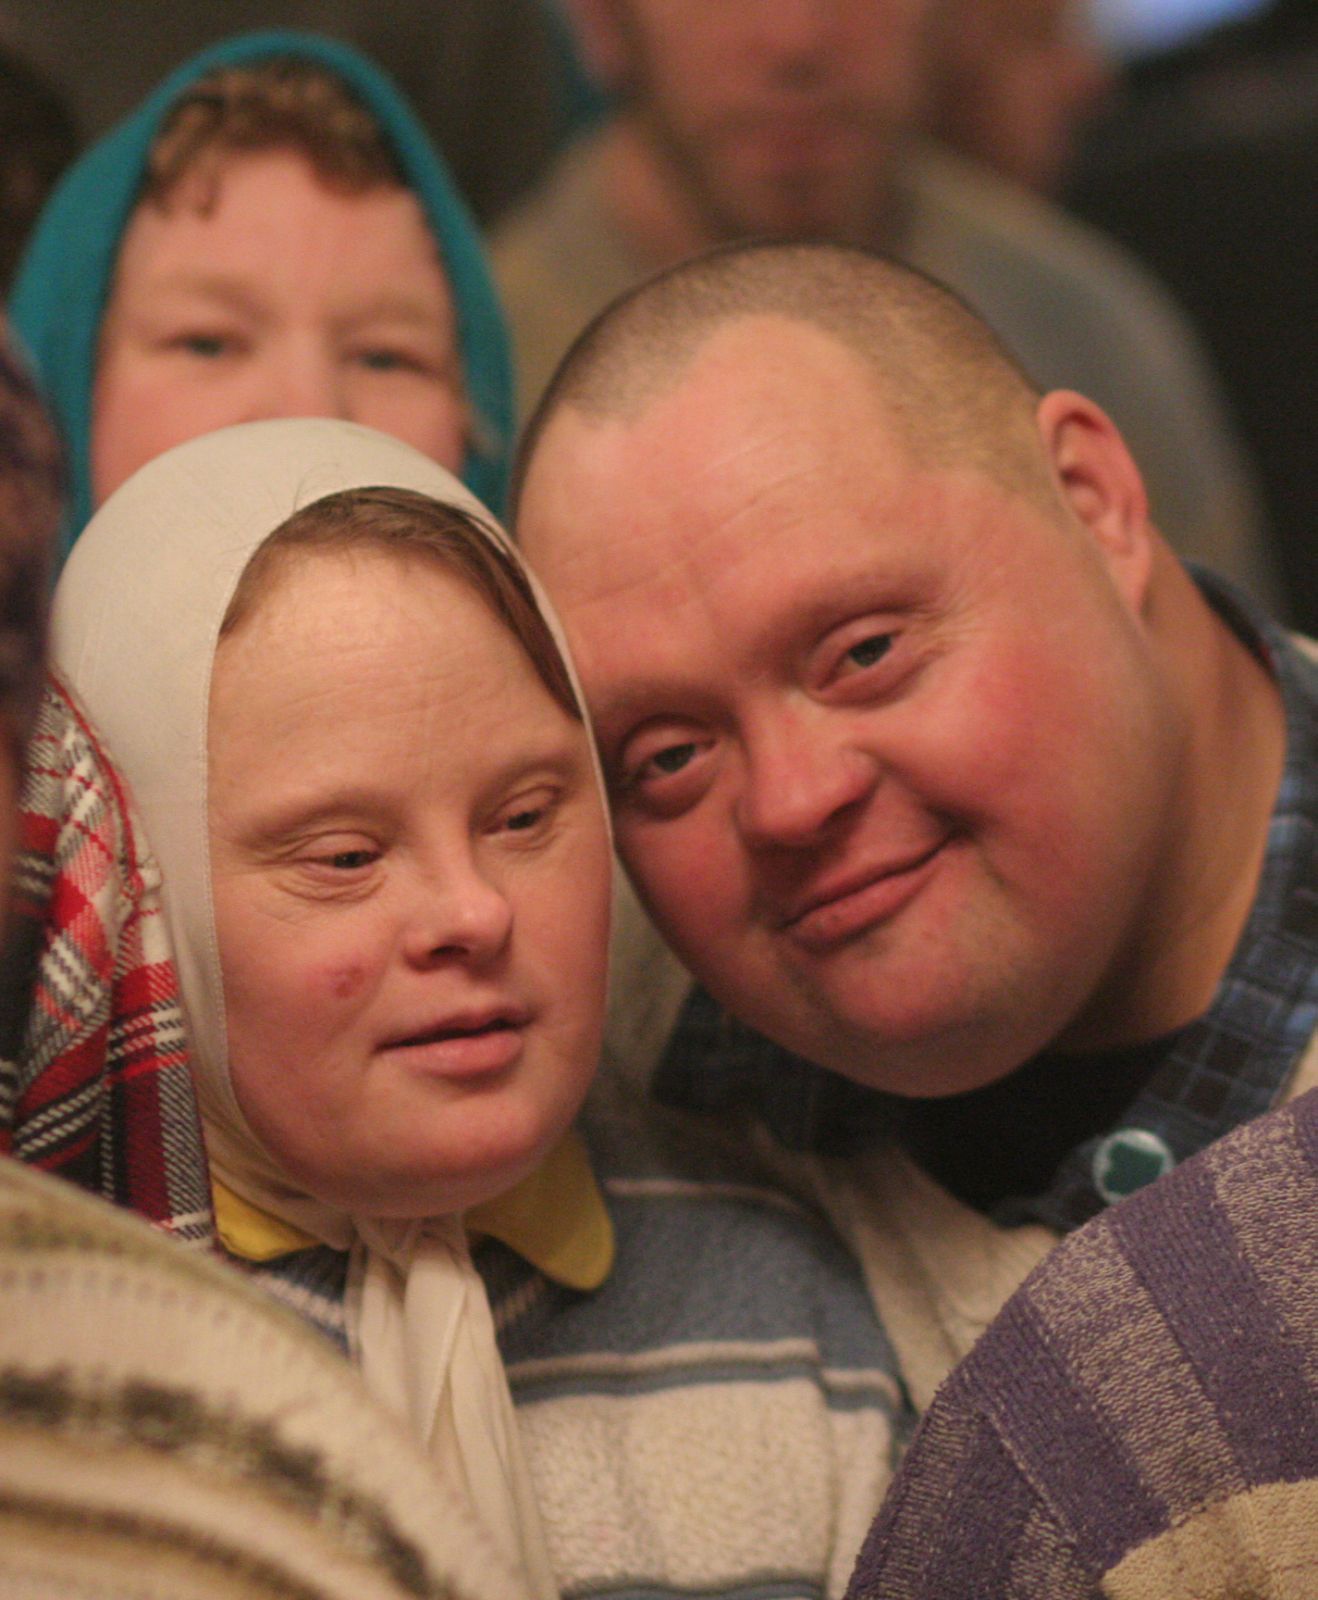 man and woman with Down syndrome